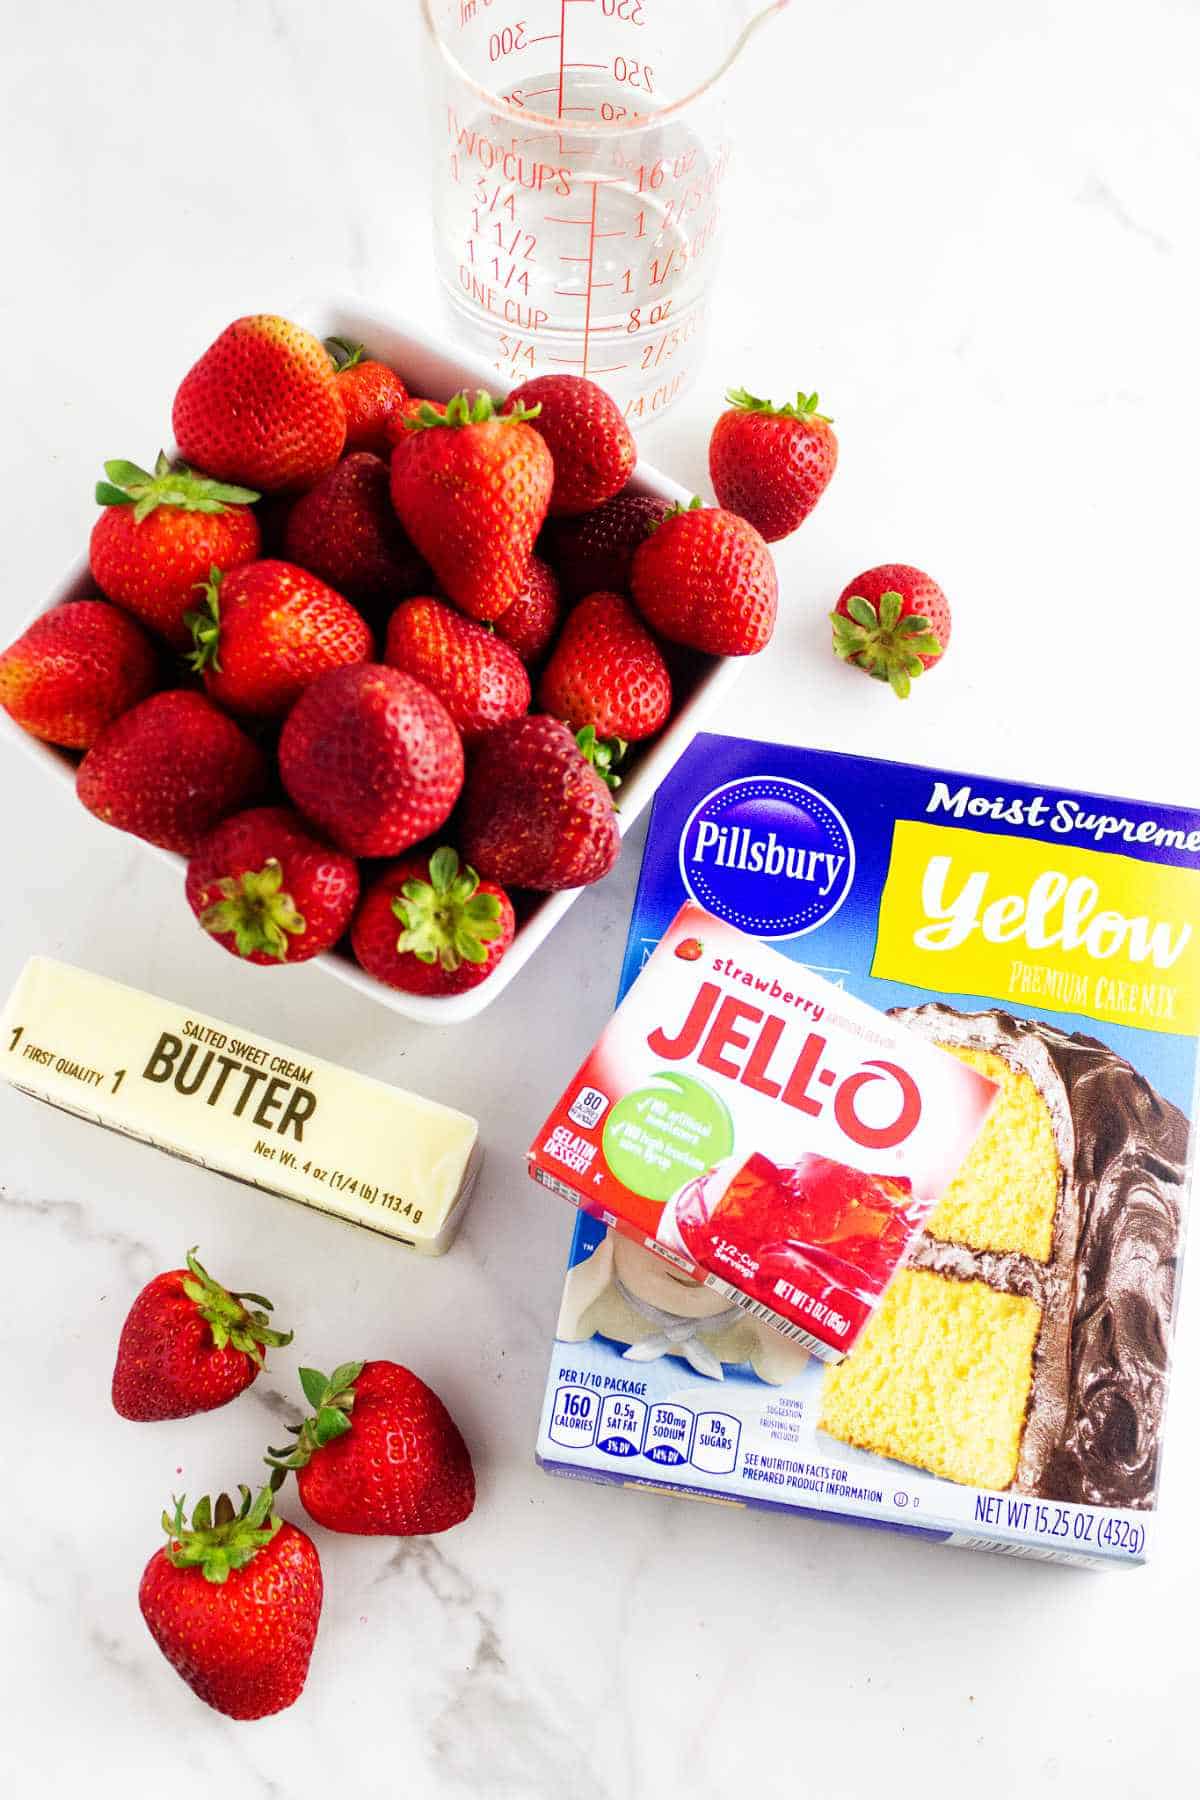 layout on a white background with a yellow cake mix, box of red jello, stick of butter, pitcher of water, and basket of strawberries.